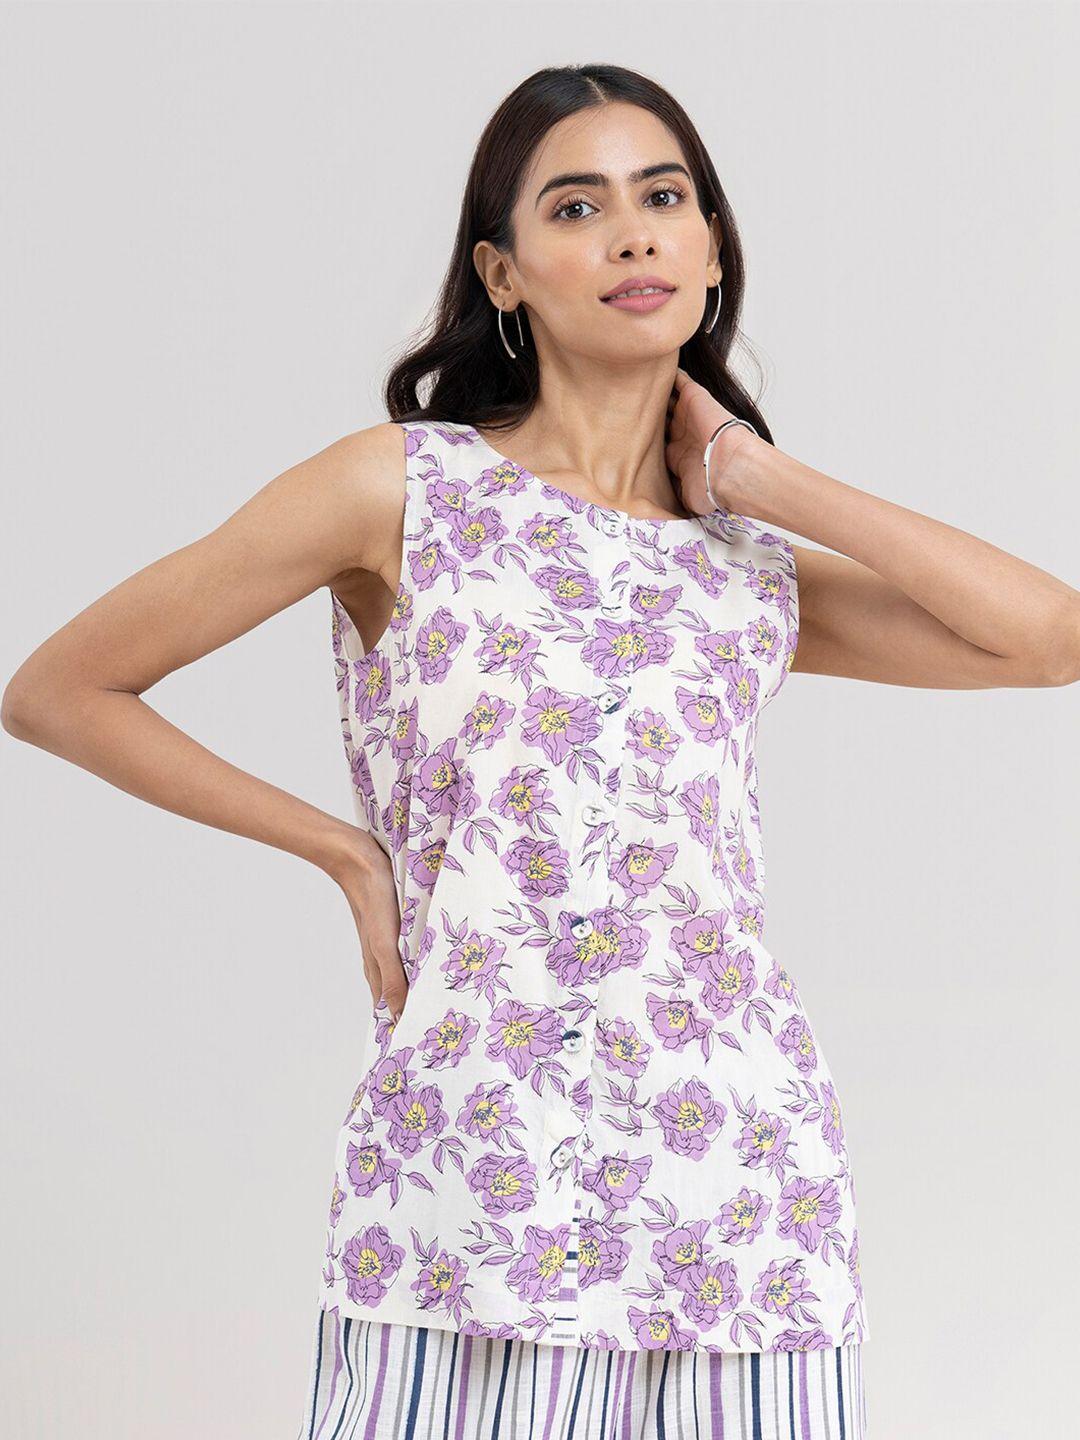 marigold-by-fablestreet-women-cream-coloured-&-lavender-floral-print-top